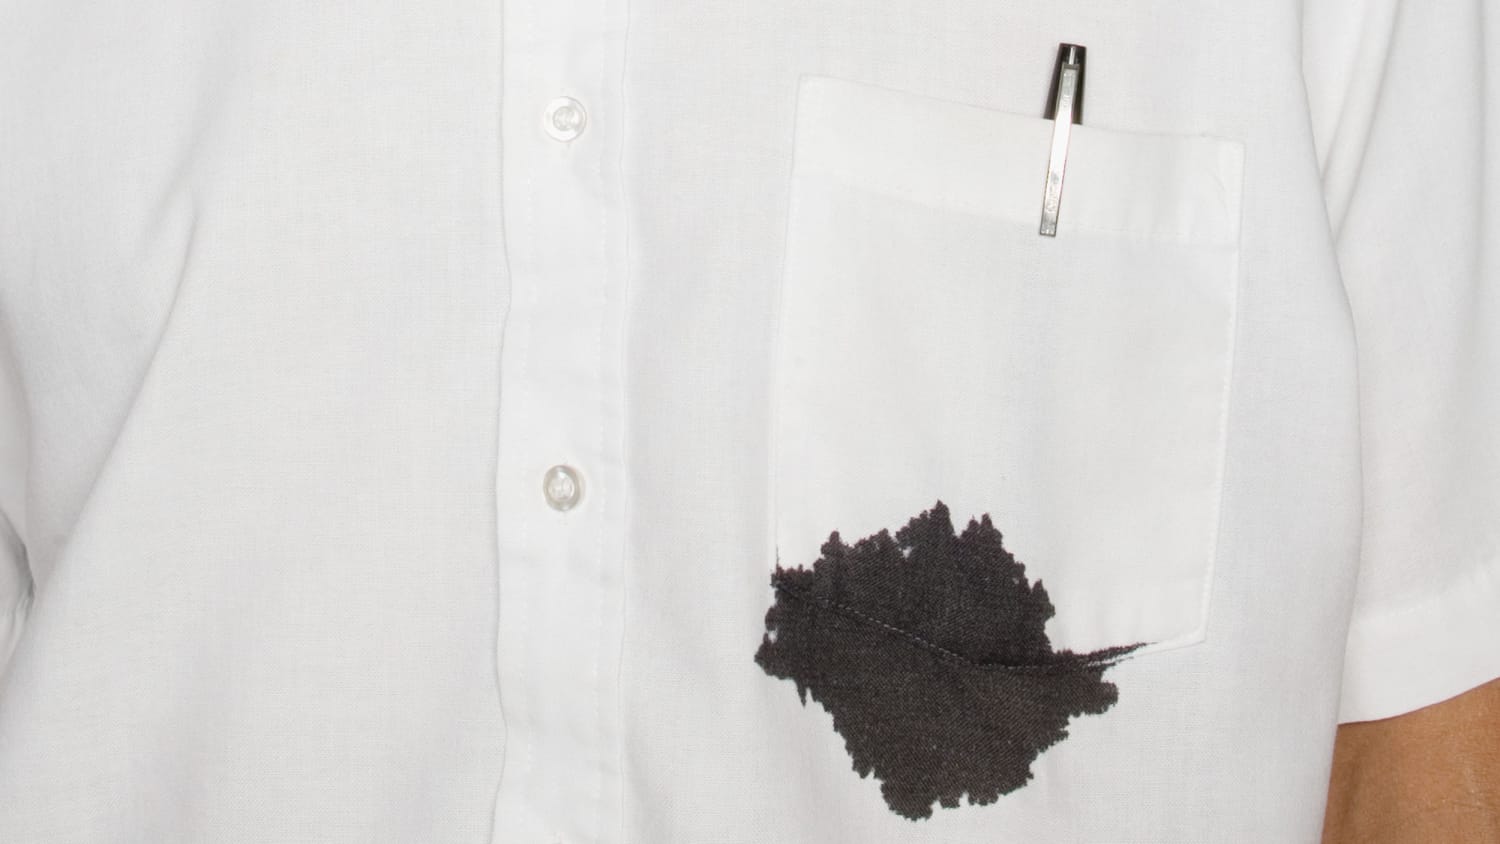 How To Remove Ink Stains From Your Clothes And Carpet,Whole Wheat Bread Machine Recipes